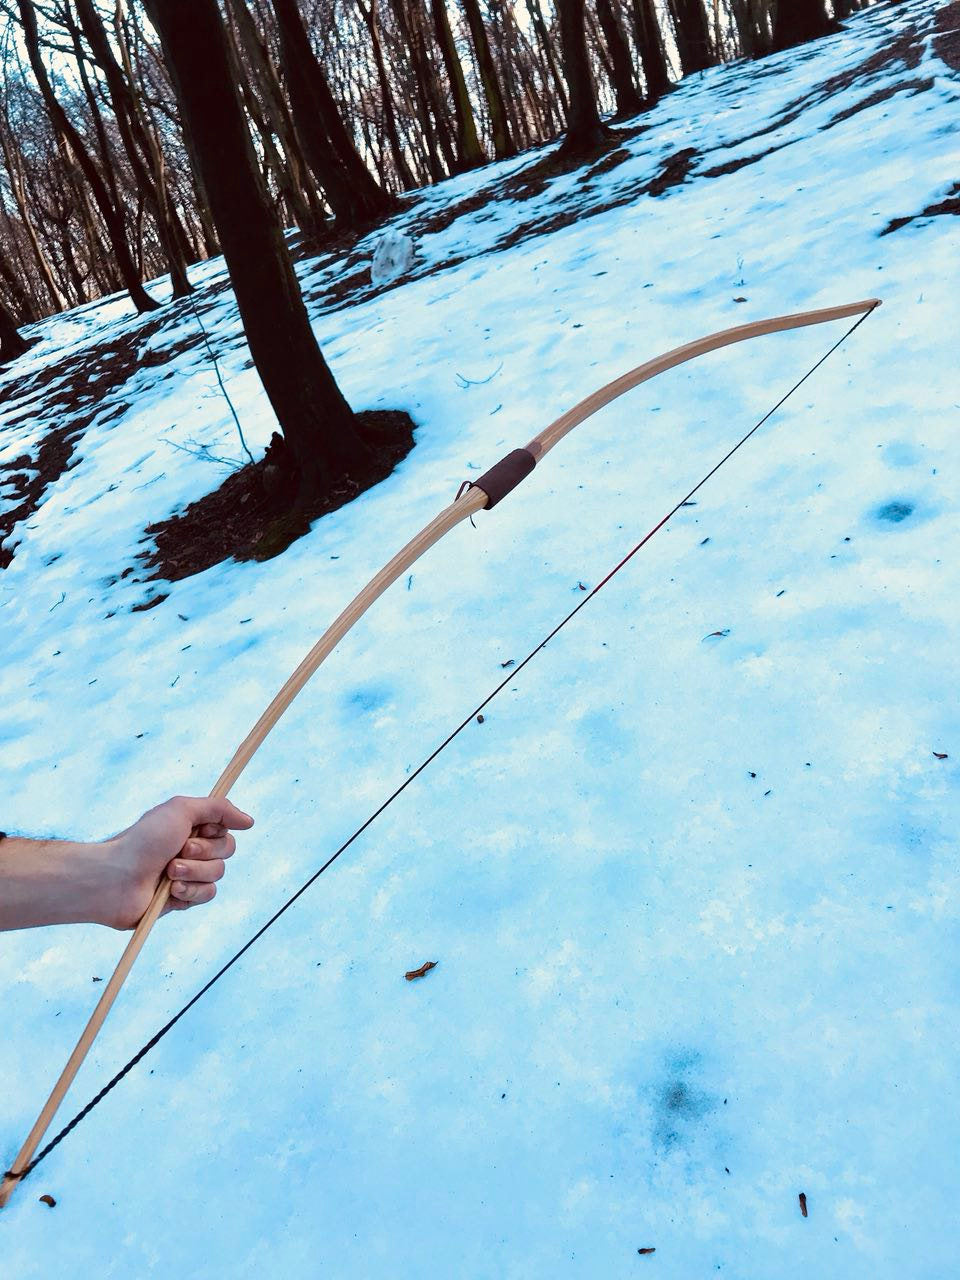 English traditional wooden archery bow, wooden longbow, archery bow, traditional longbow, traditional archery, Karl bow